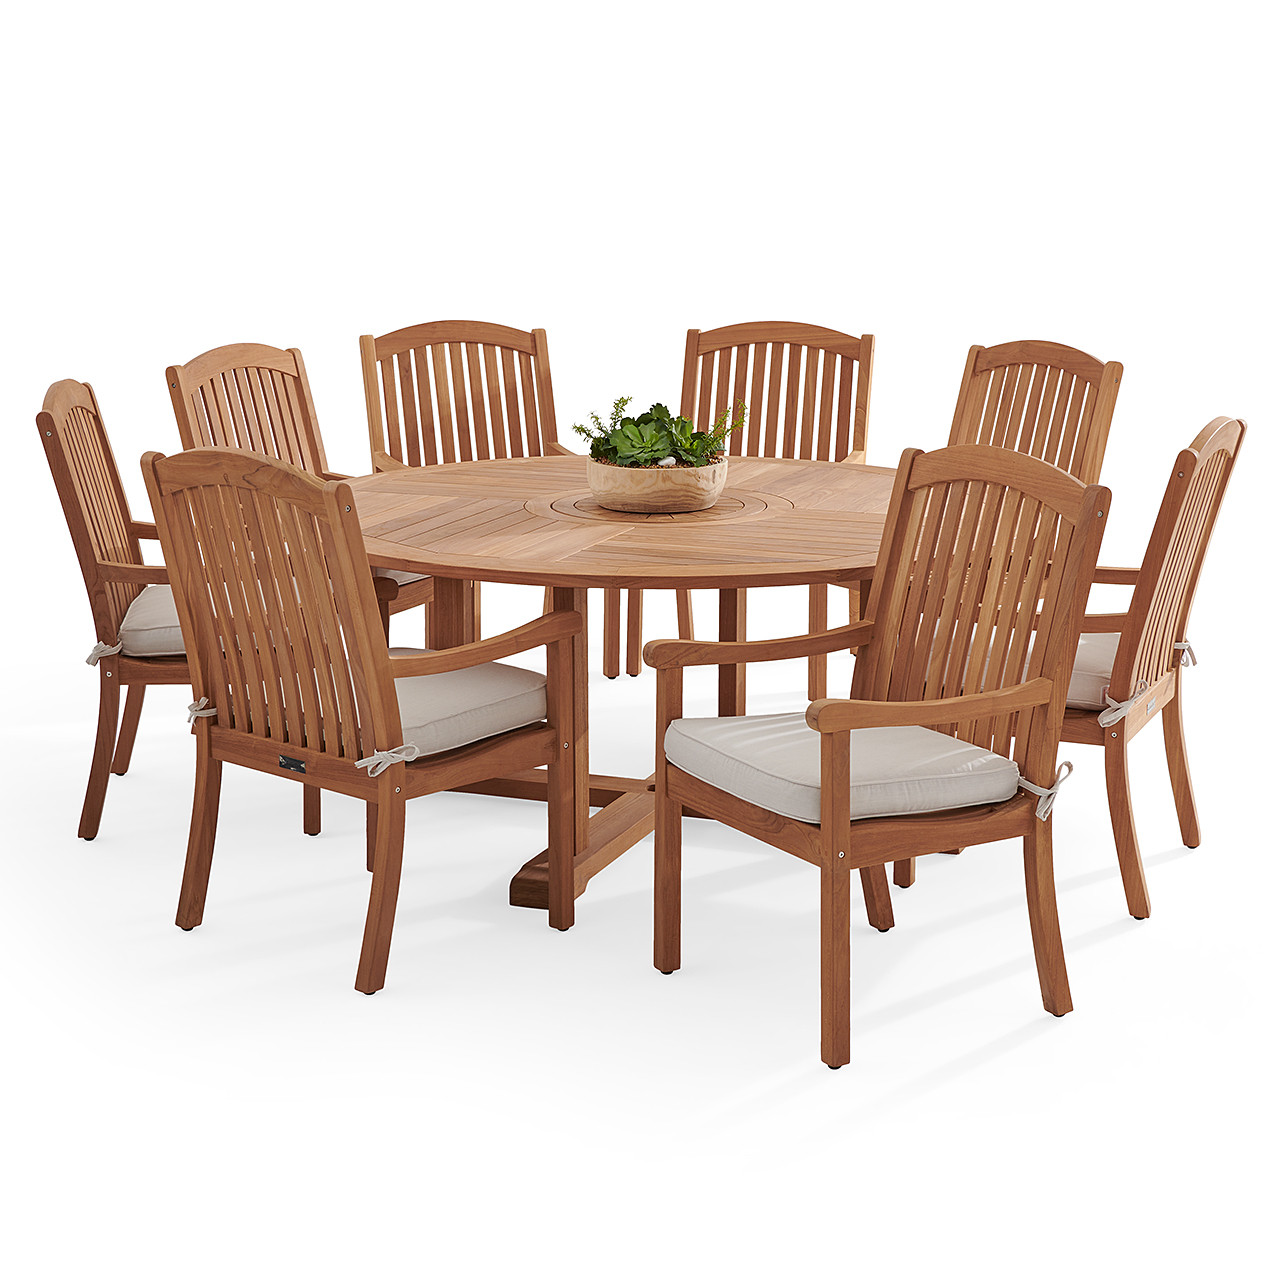 Eastchester Teak with Cushions 9 Piece Dining Set + Bristol 70 in. D Table